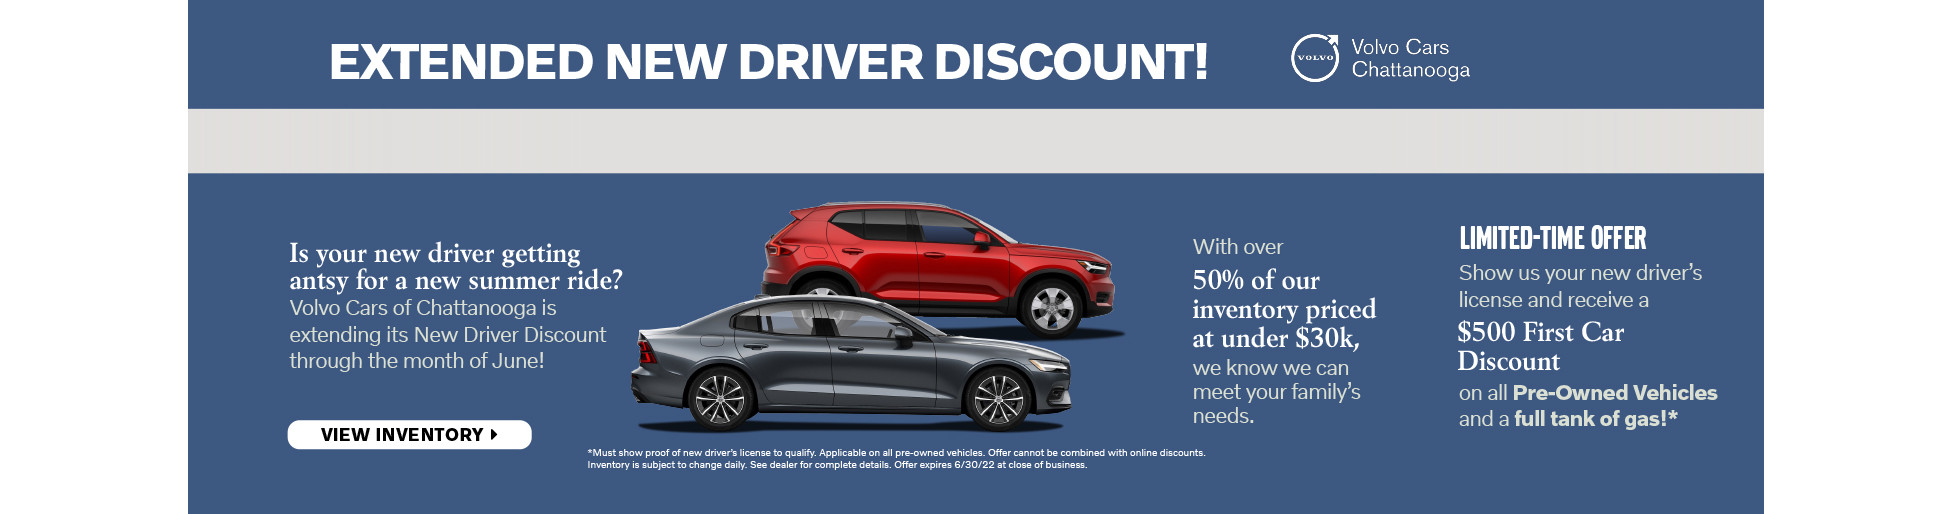 New Driver Discount